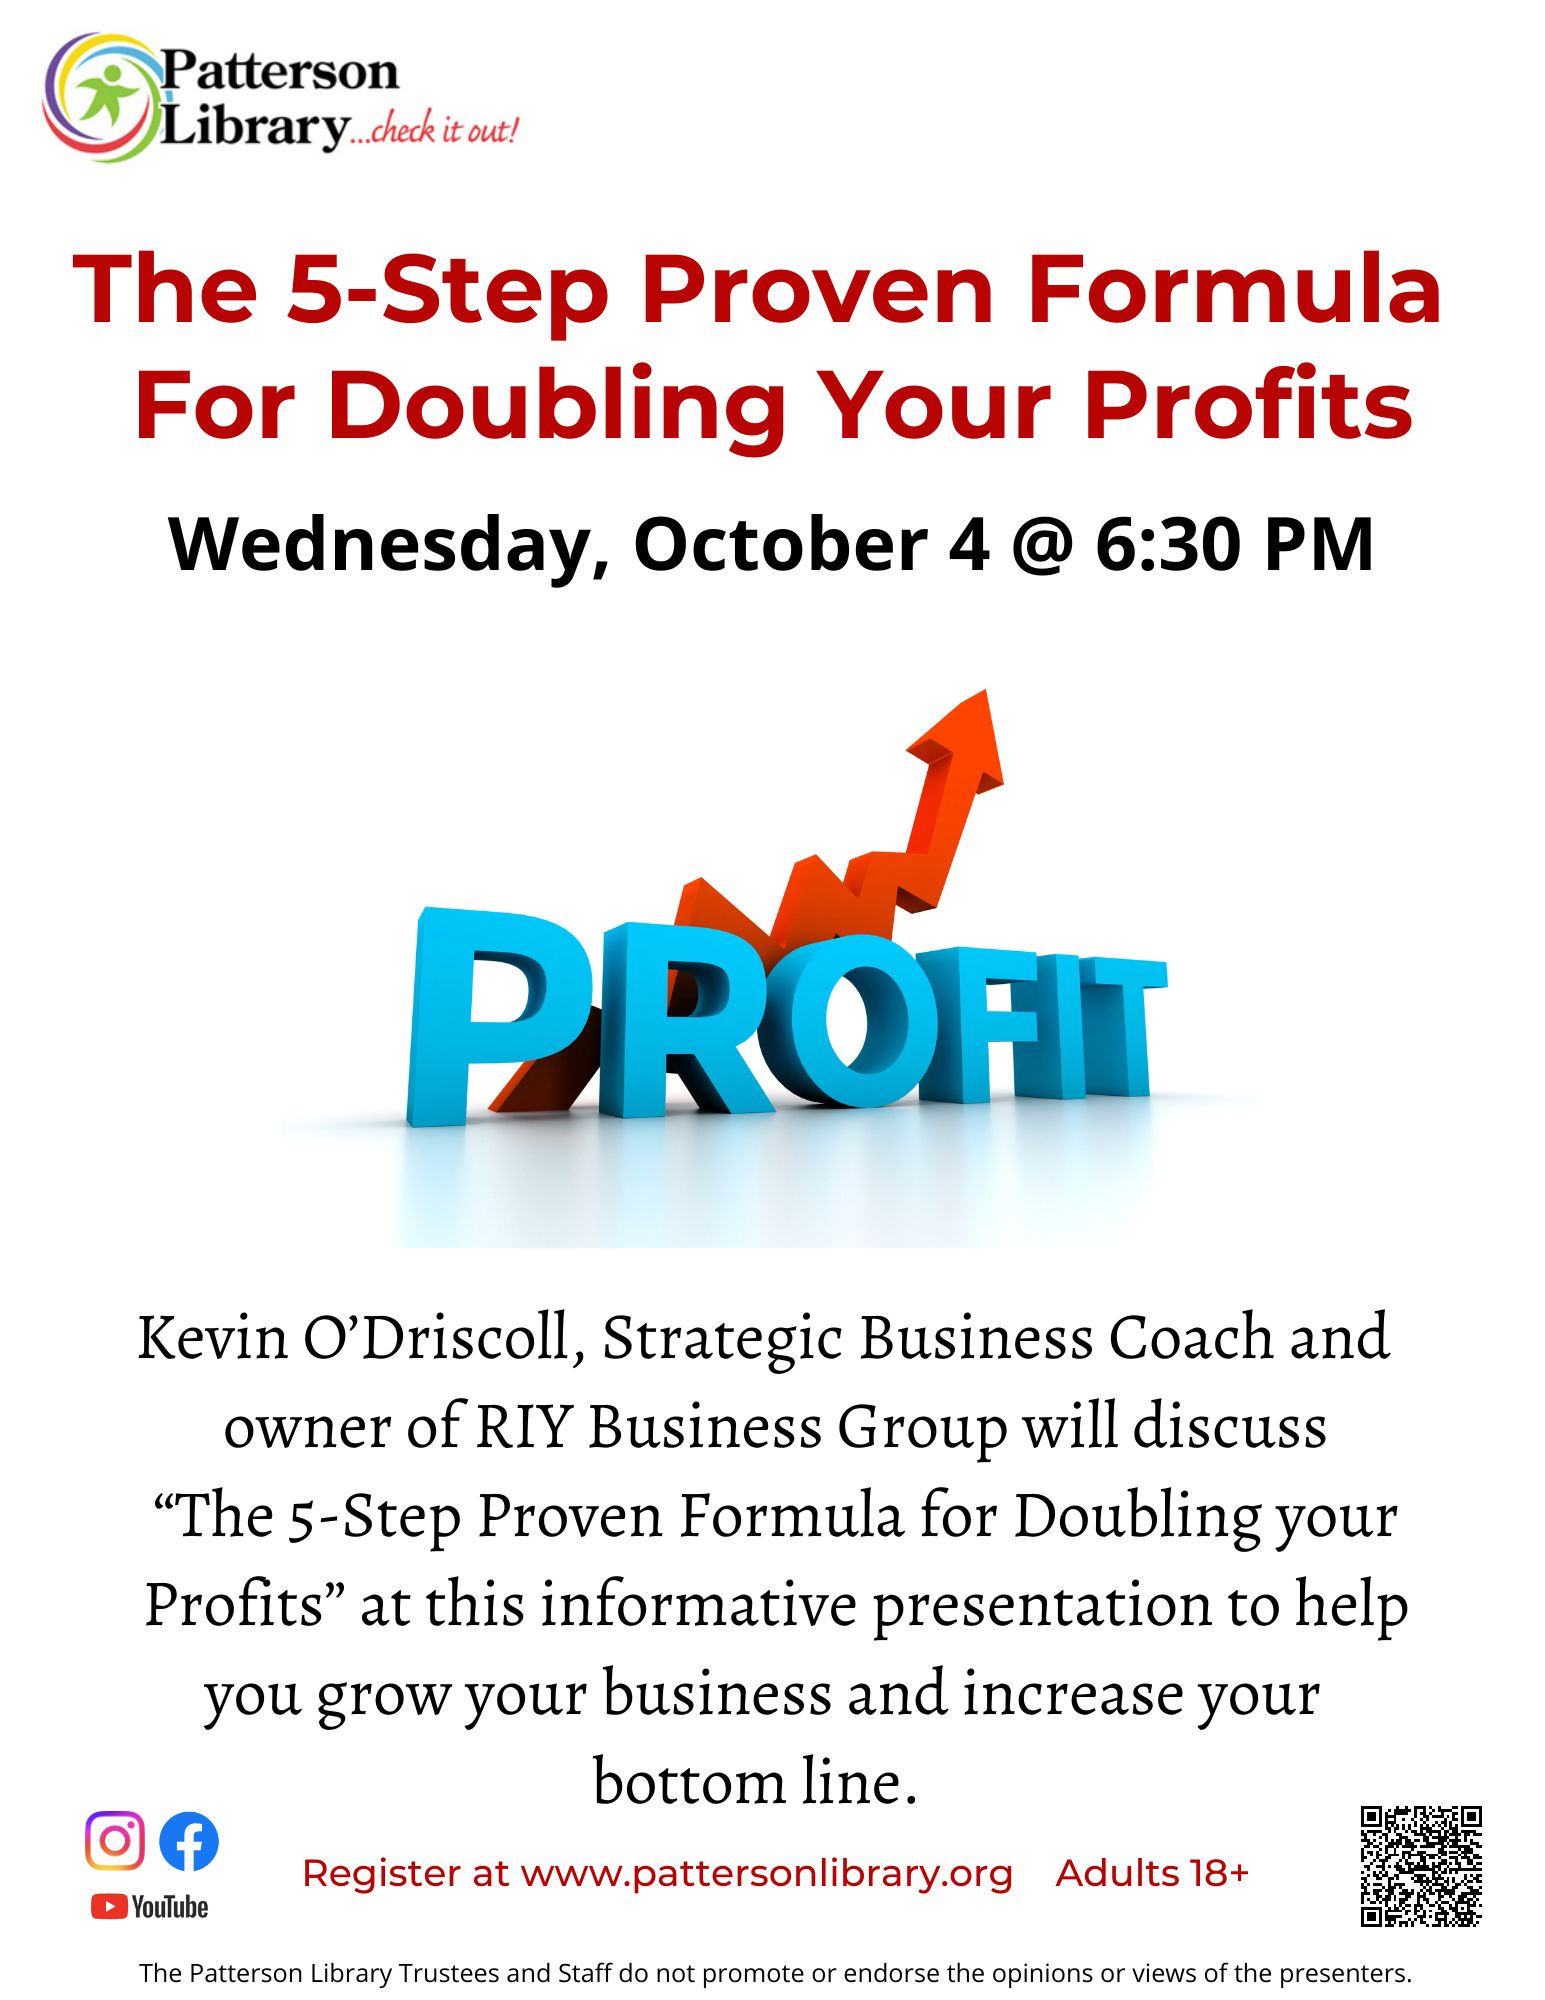 Kevin O'Driscoll, Strategic Business Coach and owner of RIY Business Group will discuss "The 5-Step Proven Formula for Doubling your Profits."